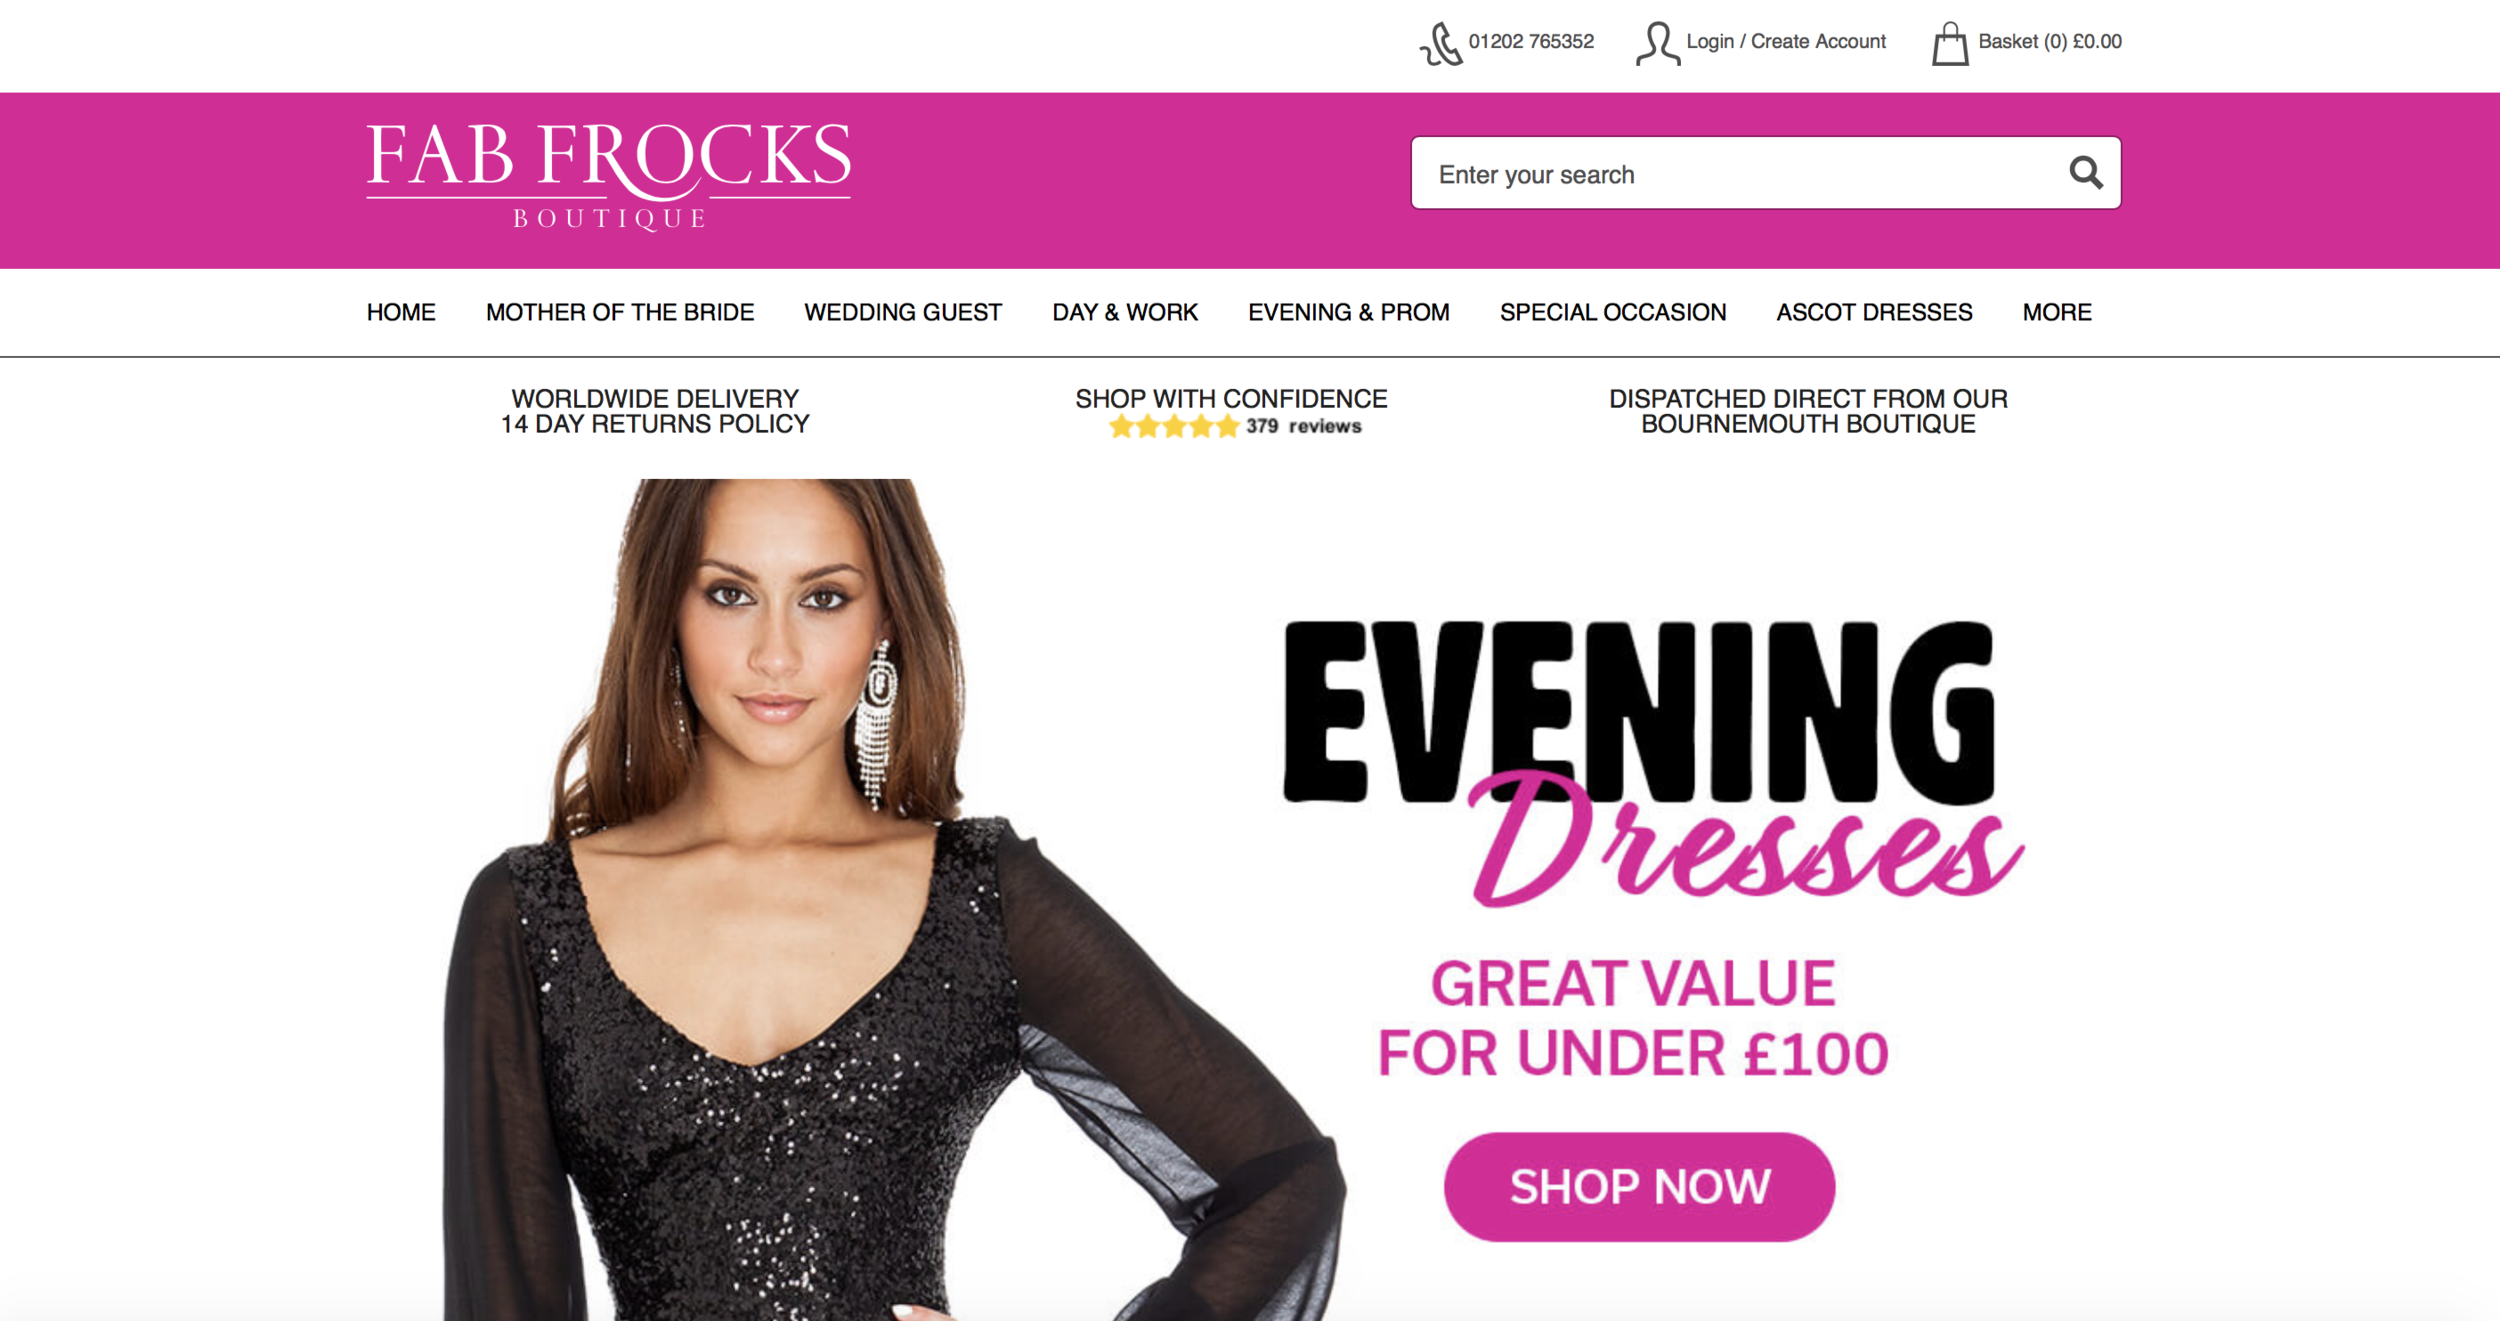 fab frocks home page.png